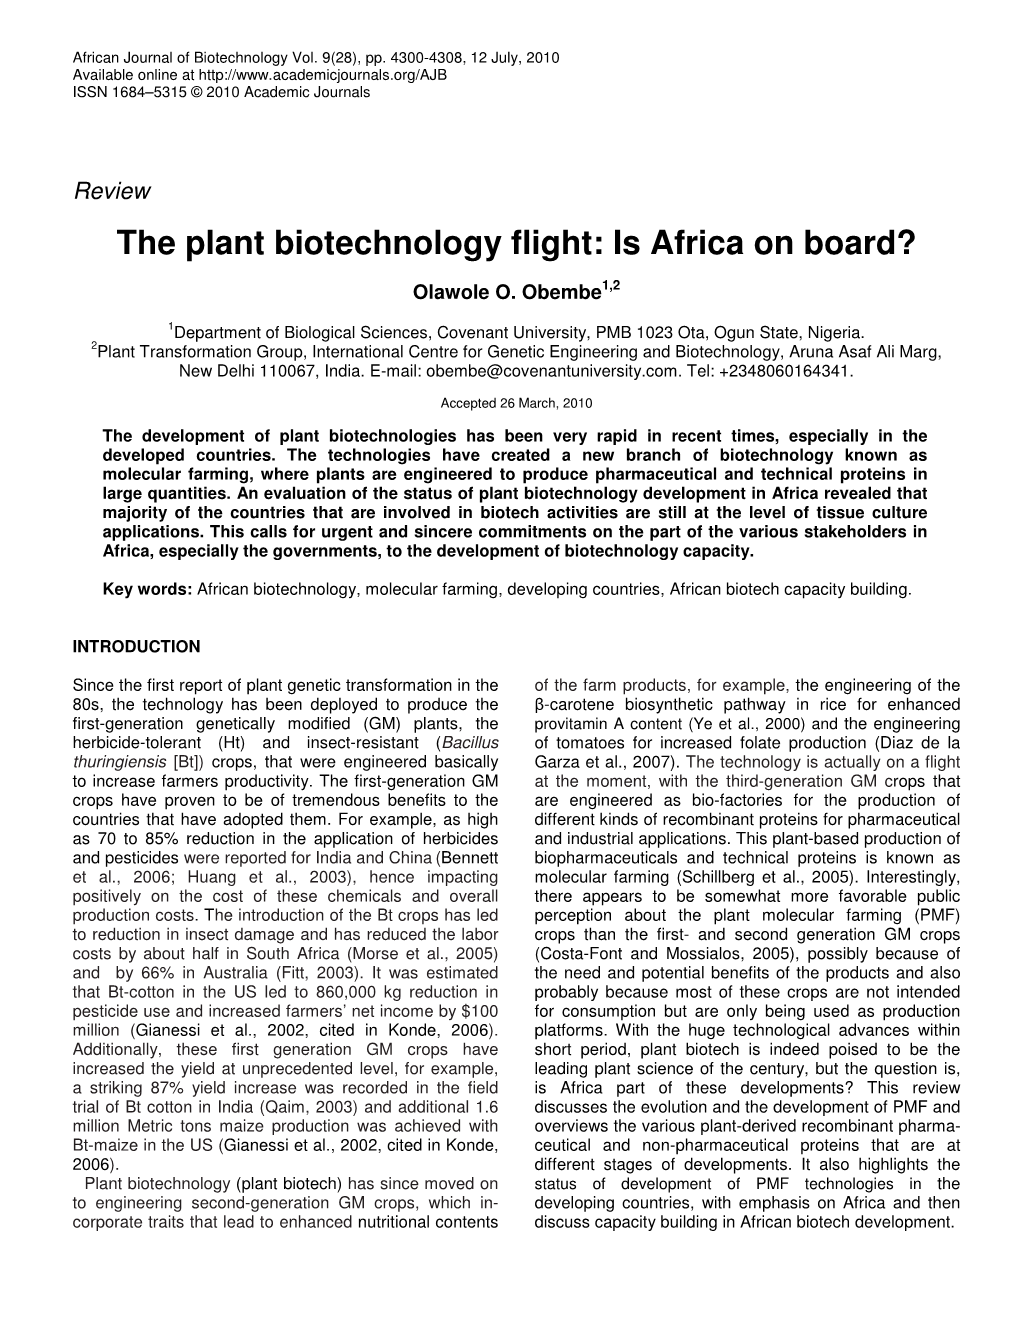 The Plant Biotechnology Flight: Is Africa on Board?